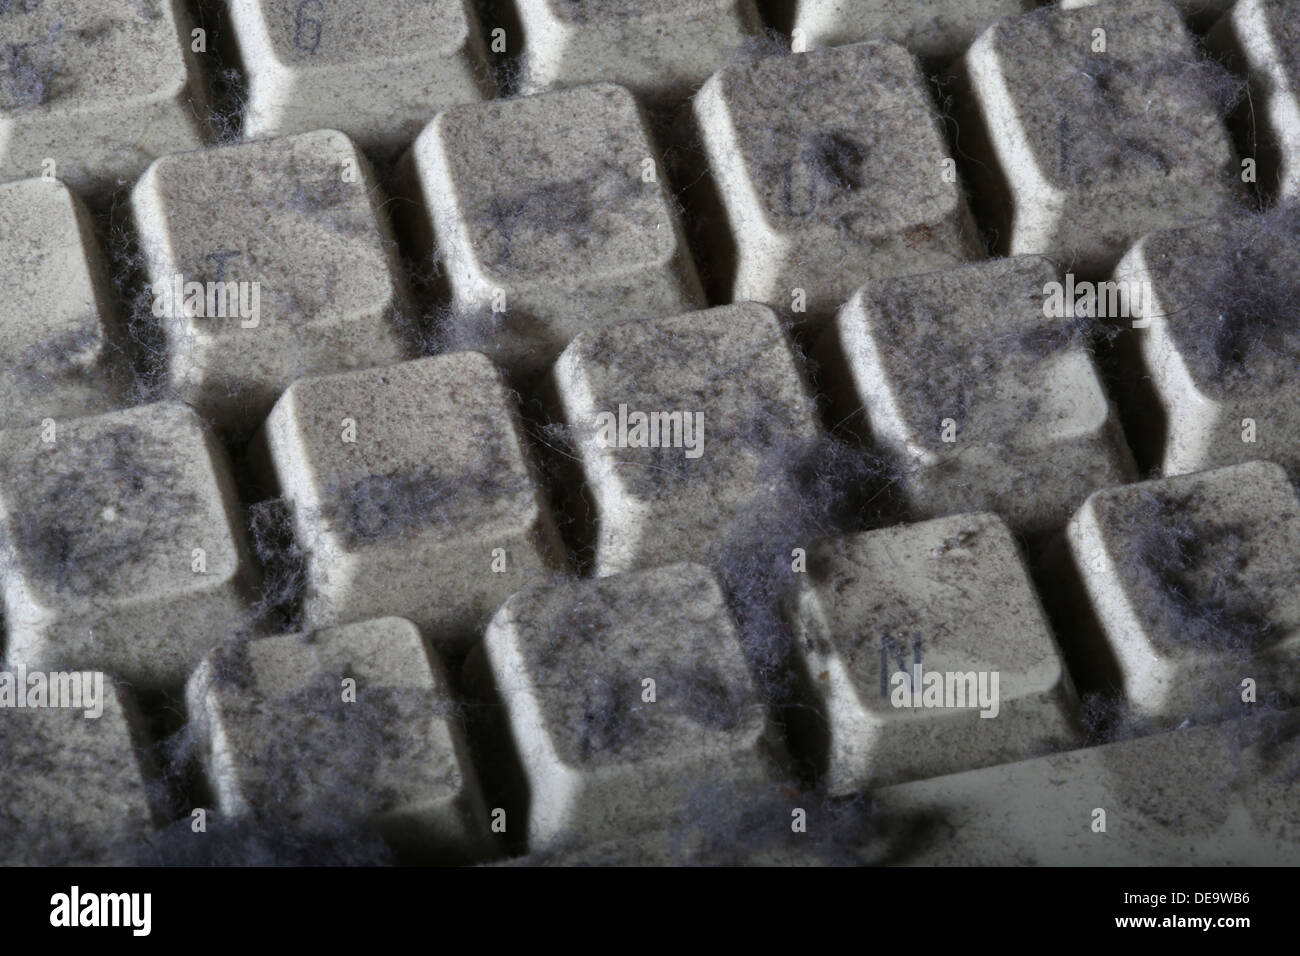 unused computer keyboard covered in dust and cobwebs Stock Photo